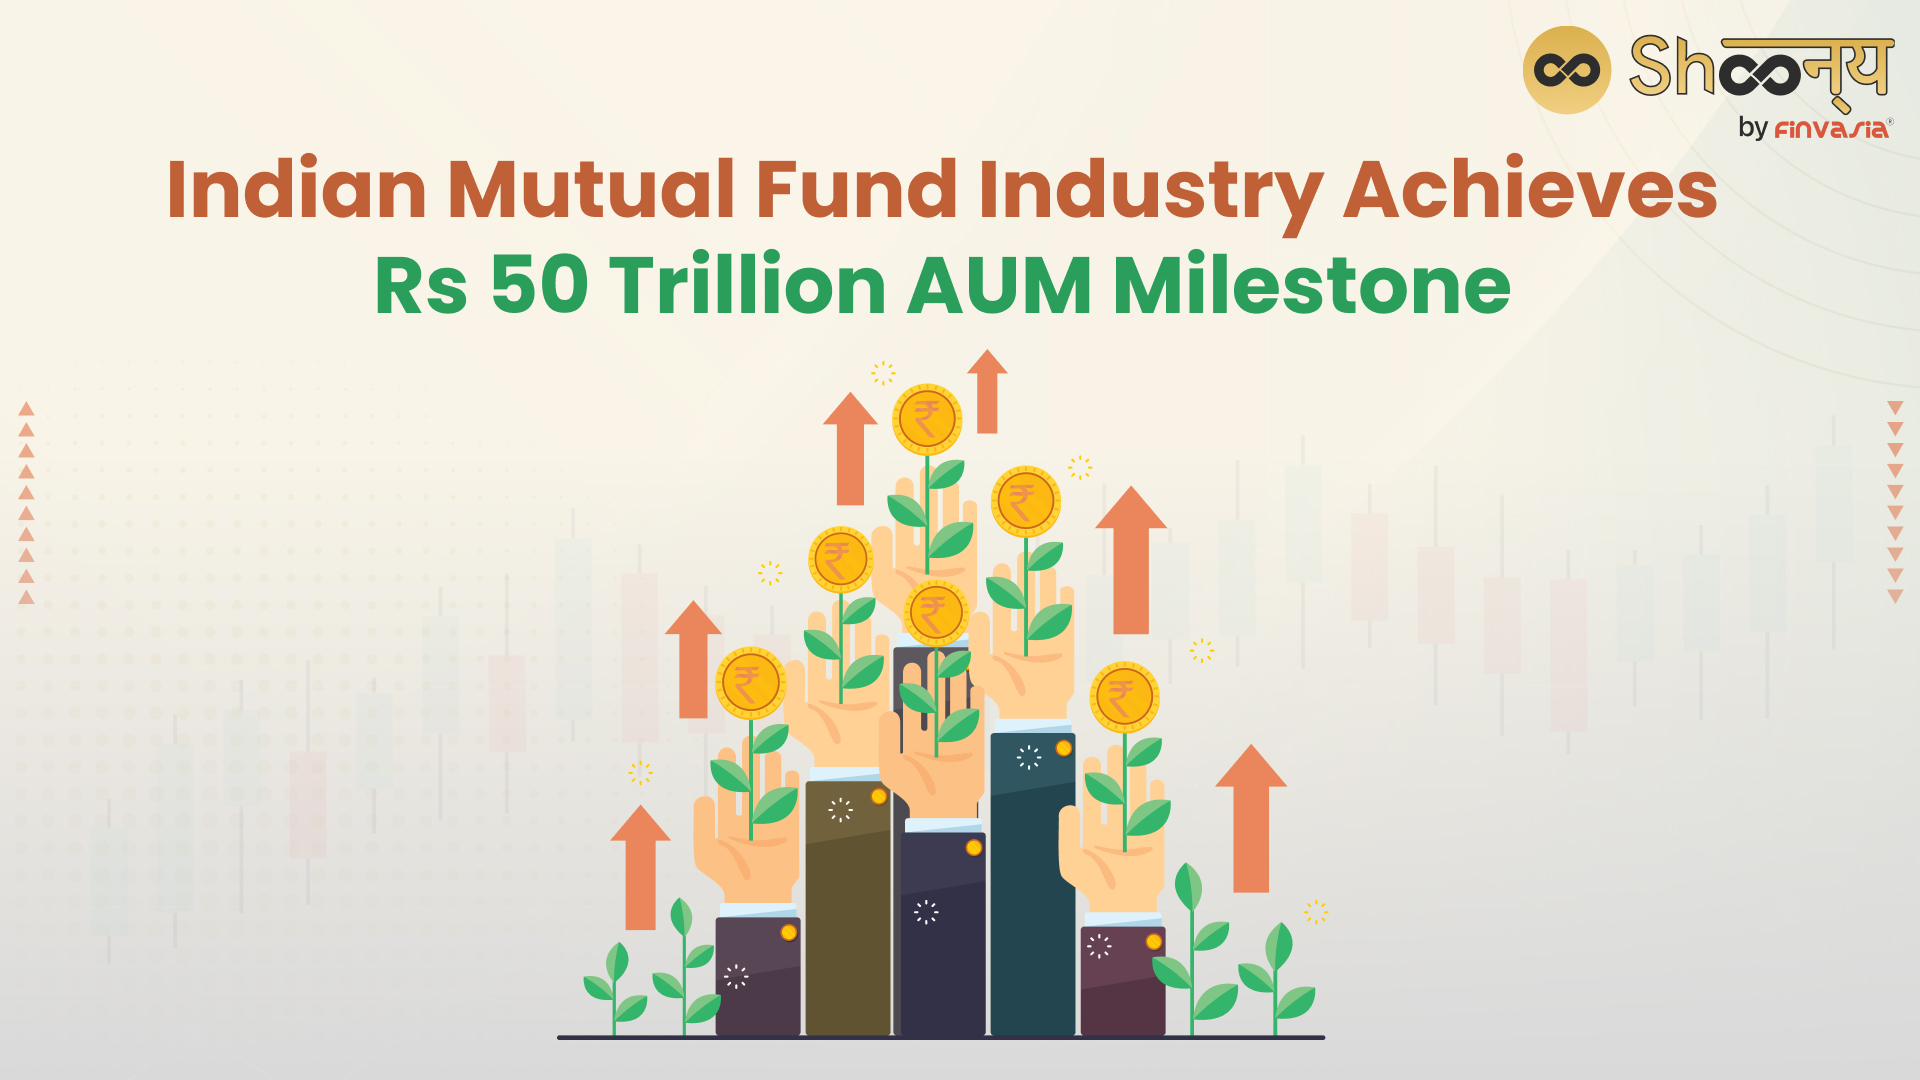 Mutual Fund Growth: SIP Accounts Surge to 8.20 Crore